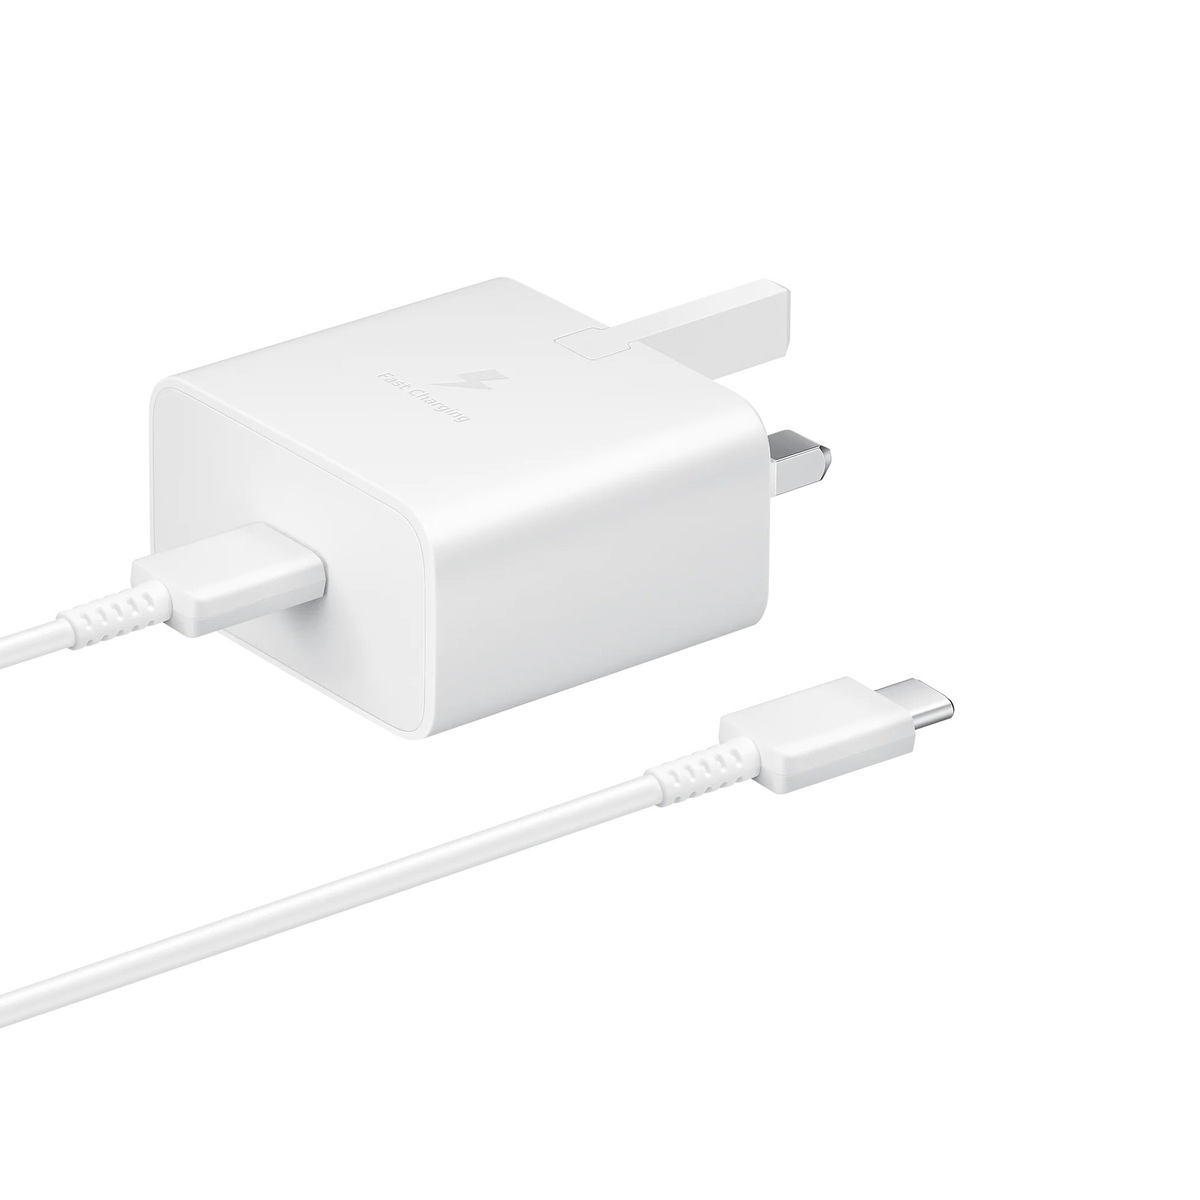 Samsung 15W Power Adapter WithTypC,Cable(EP-T1510XWEGAE),White